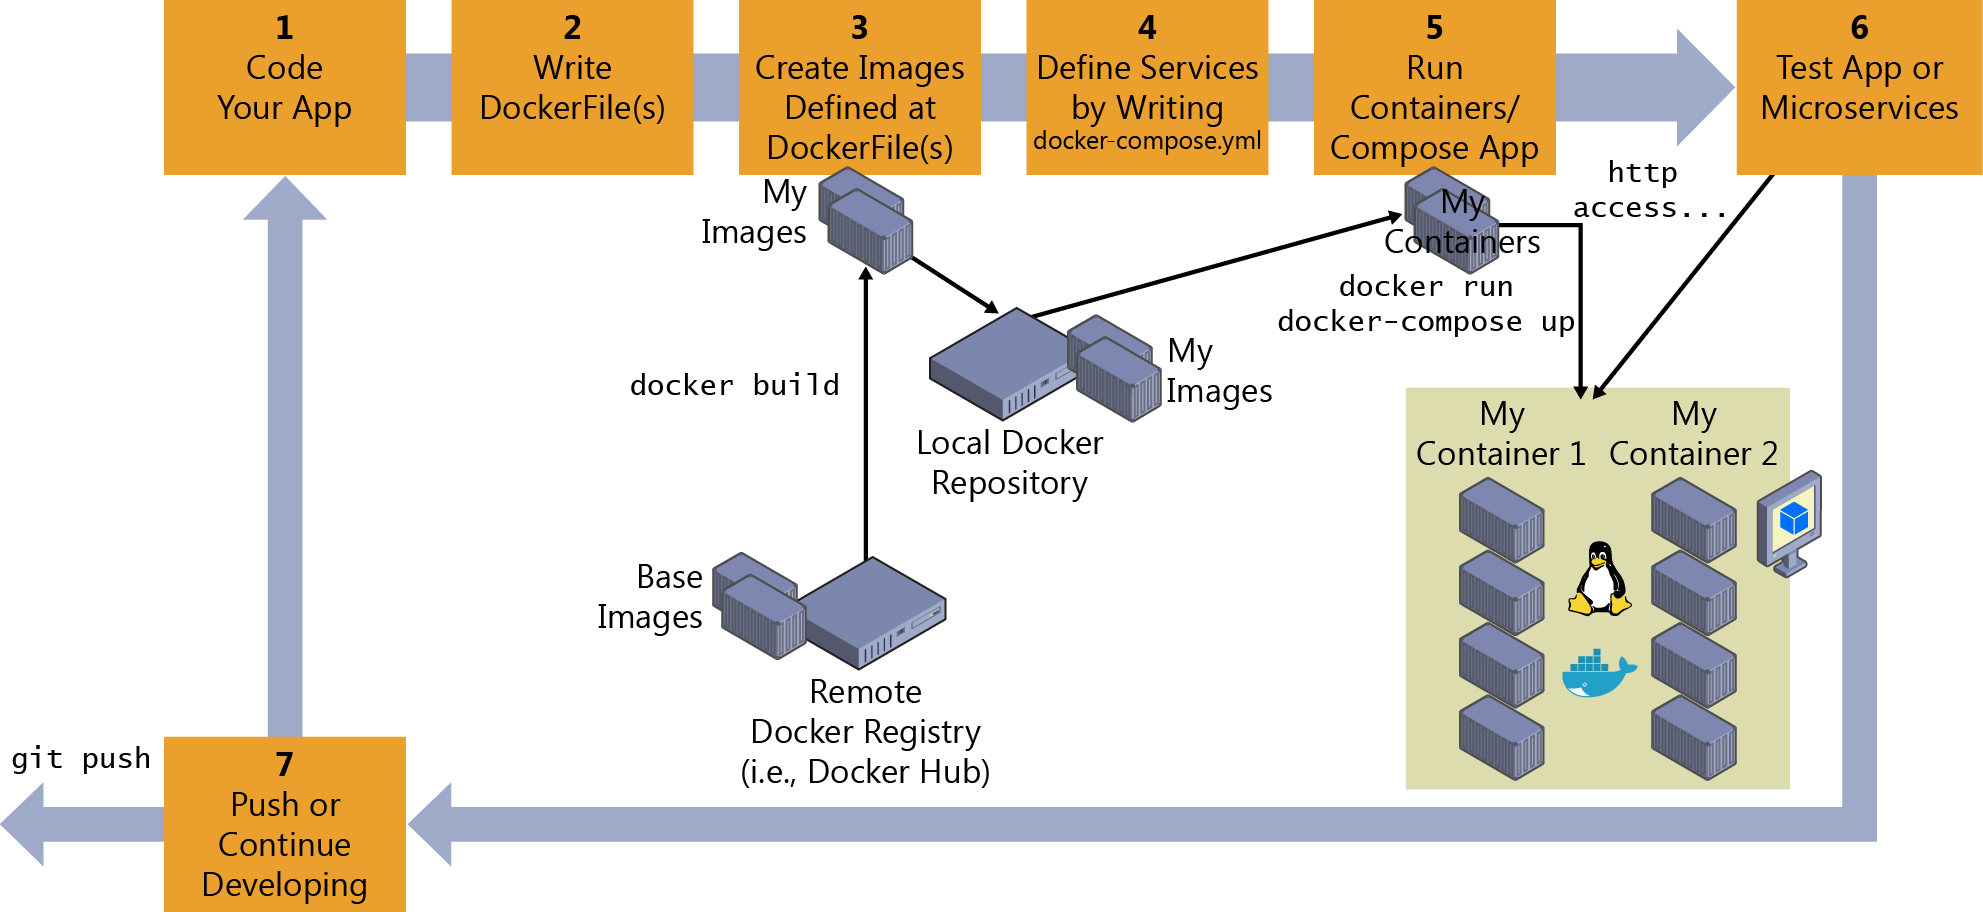 Diagram showing the seven steps it takes to create a containerized app.